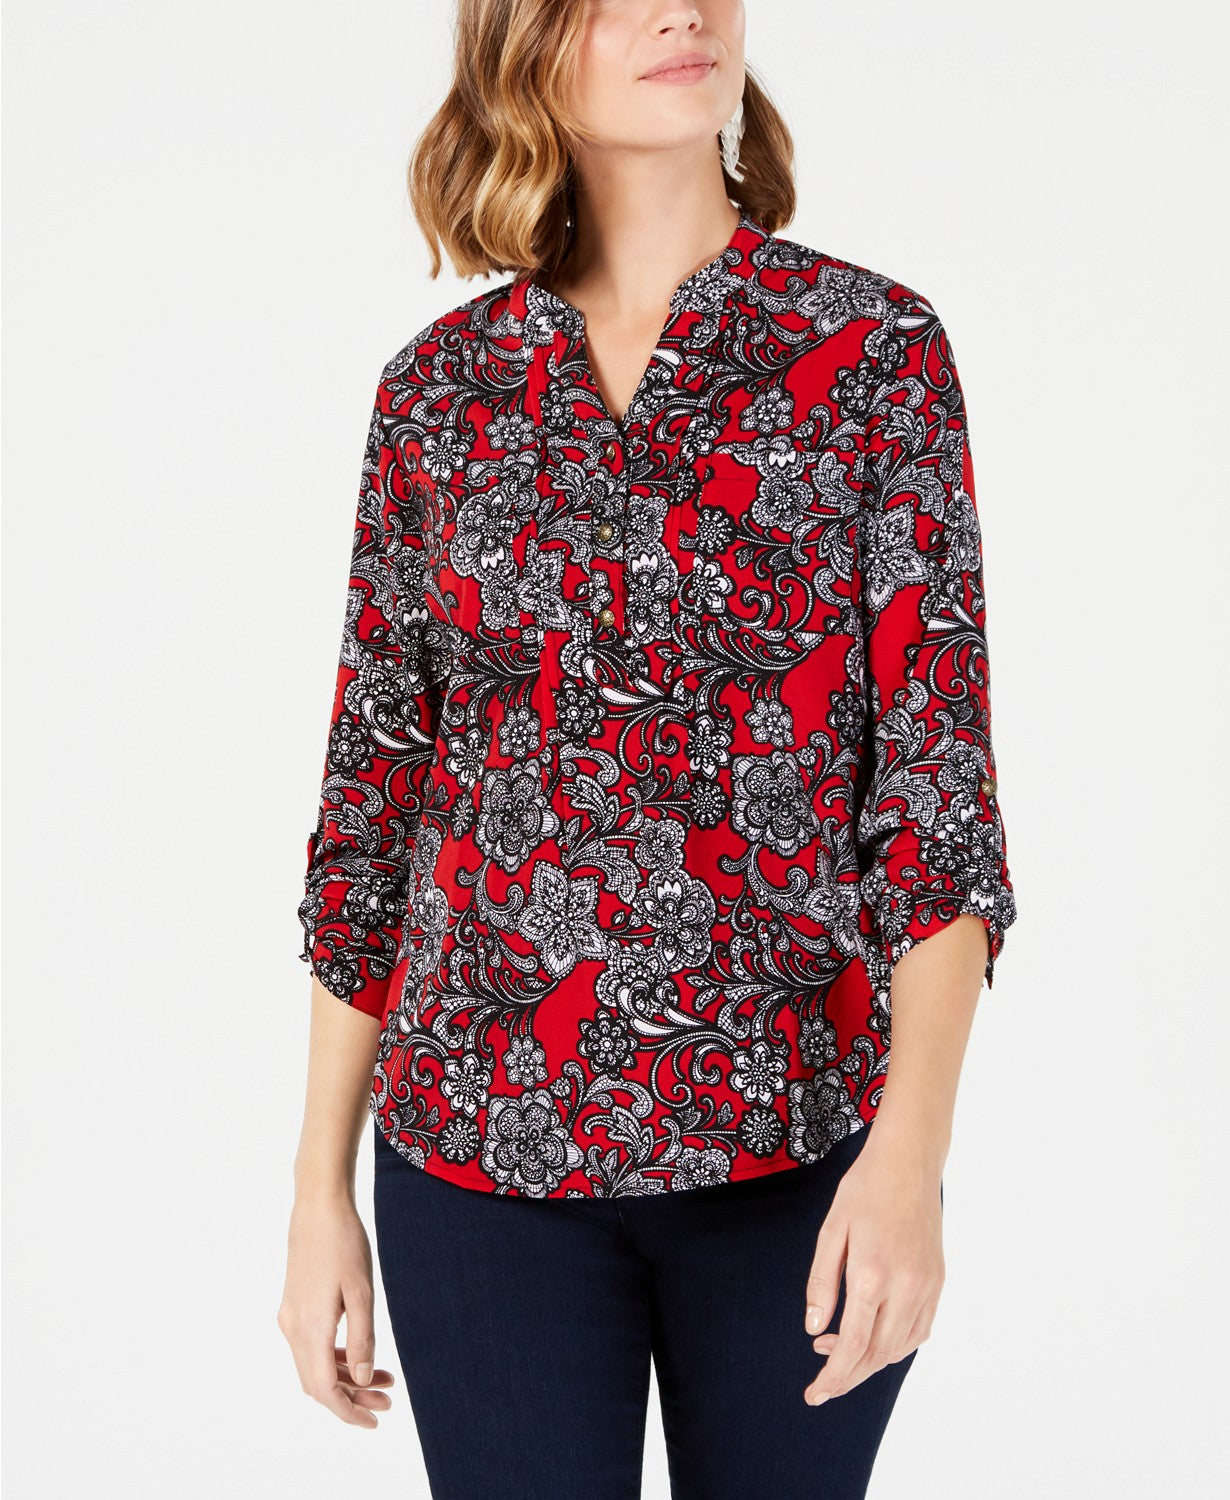 NY COLLECTION Allover Printed Top Dark Red PS